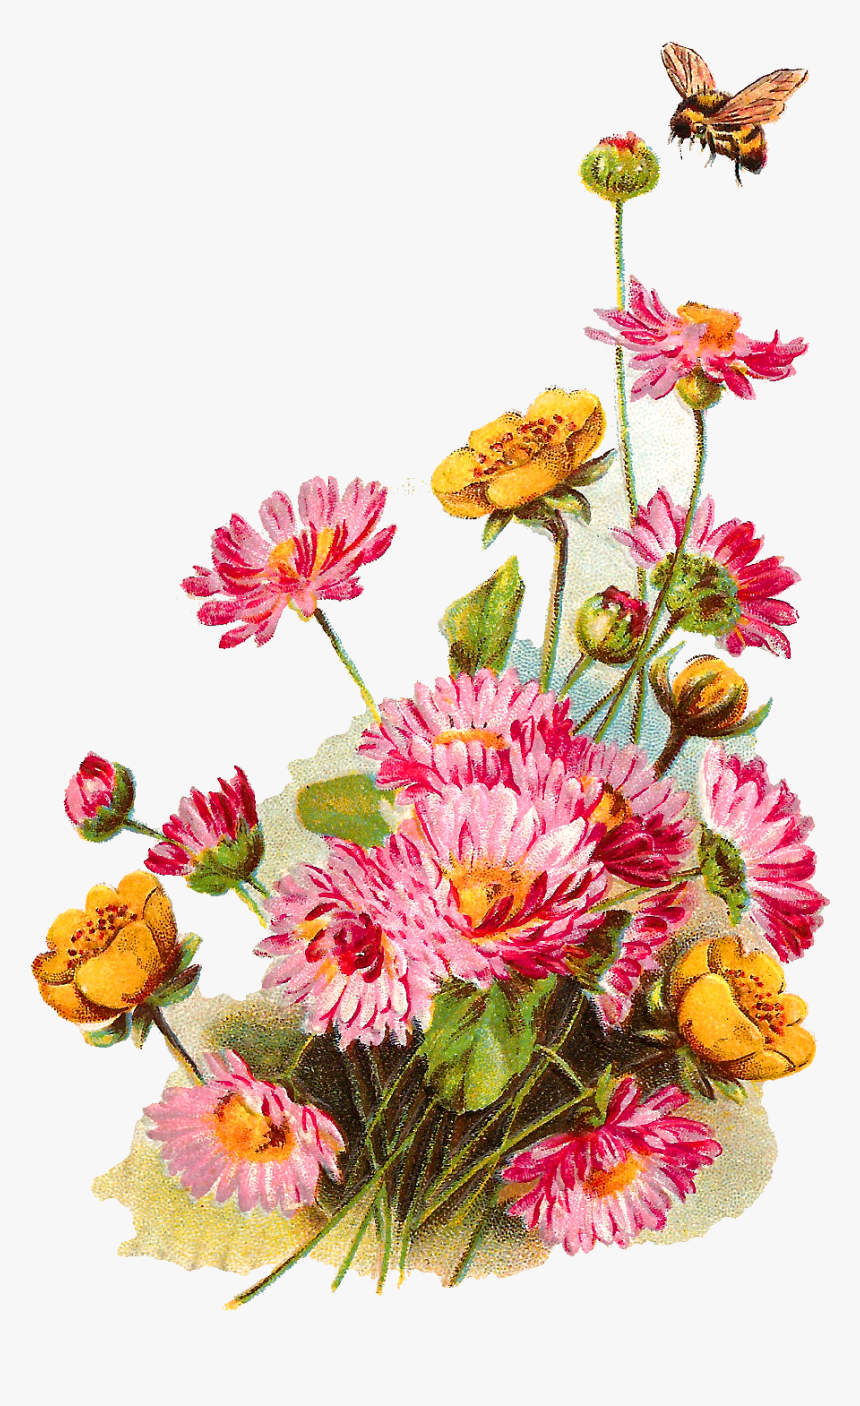 Pink Flower Bunch Png, Transparent Png, Free Download